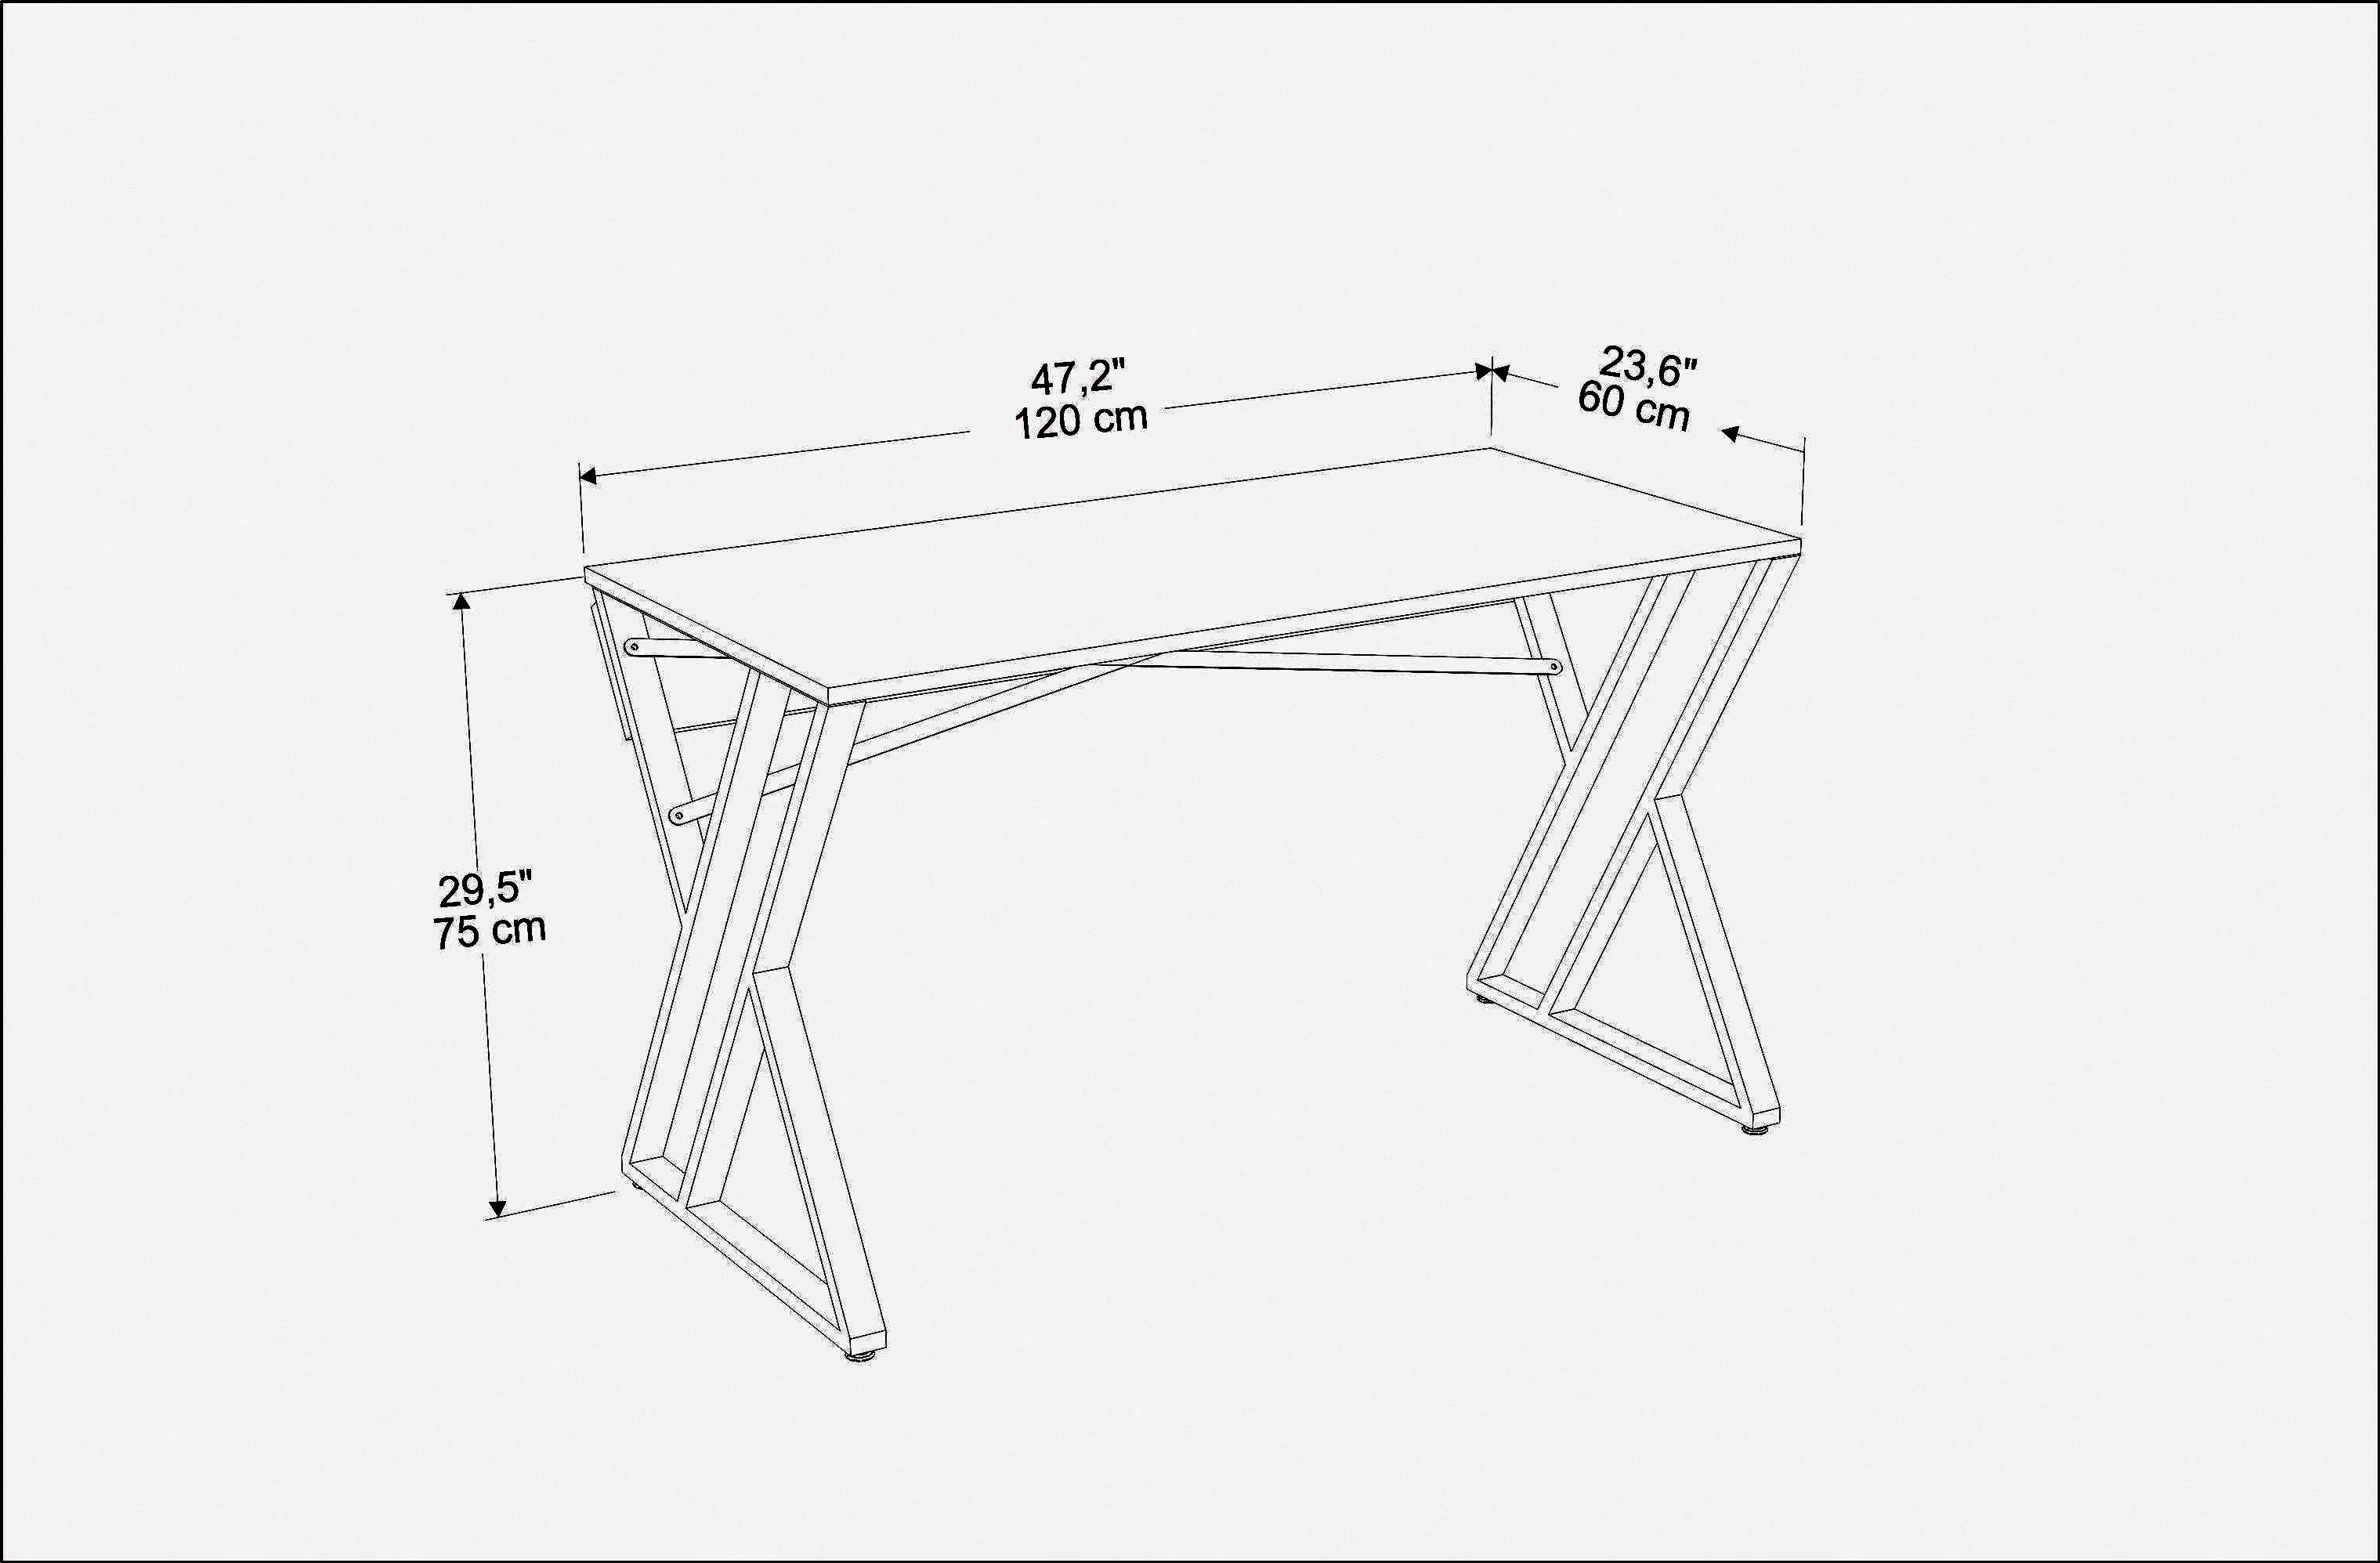 Gyza 47 inch Wide Computer Writing Desk with Metal Frame